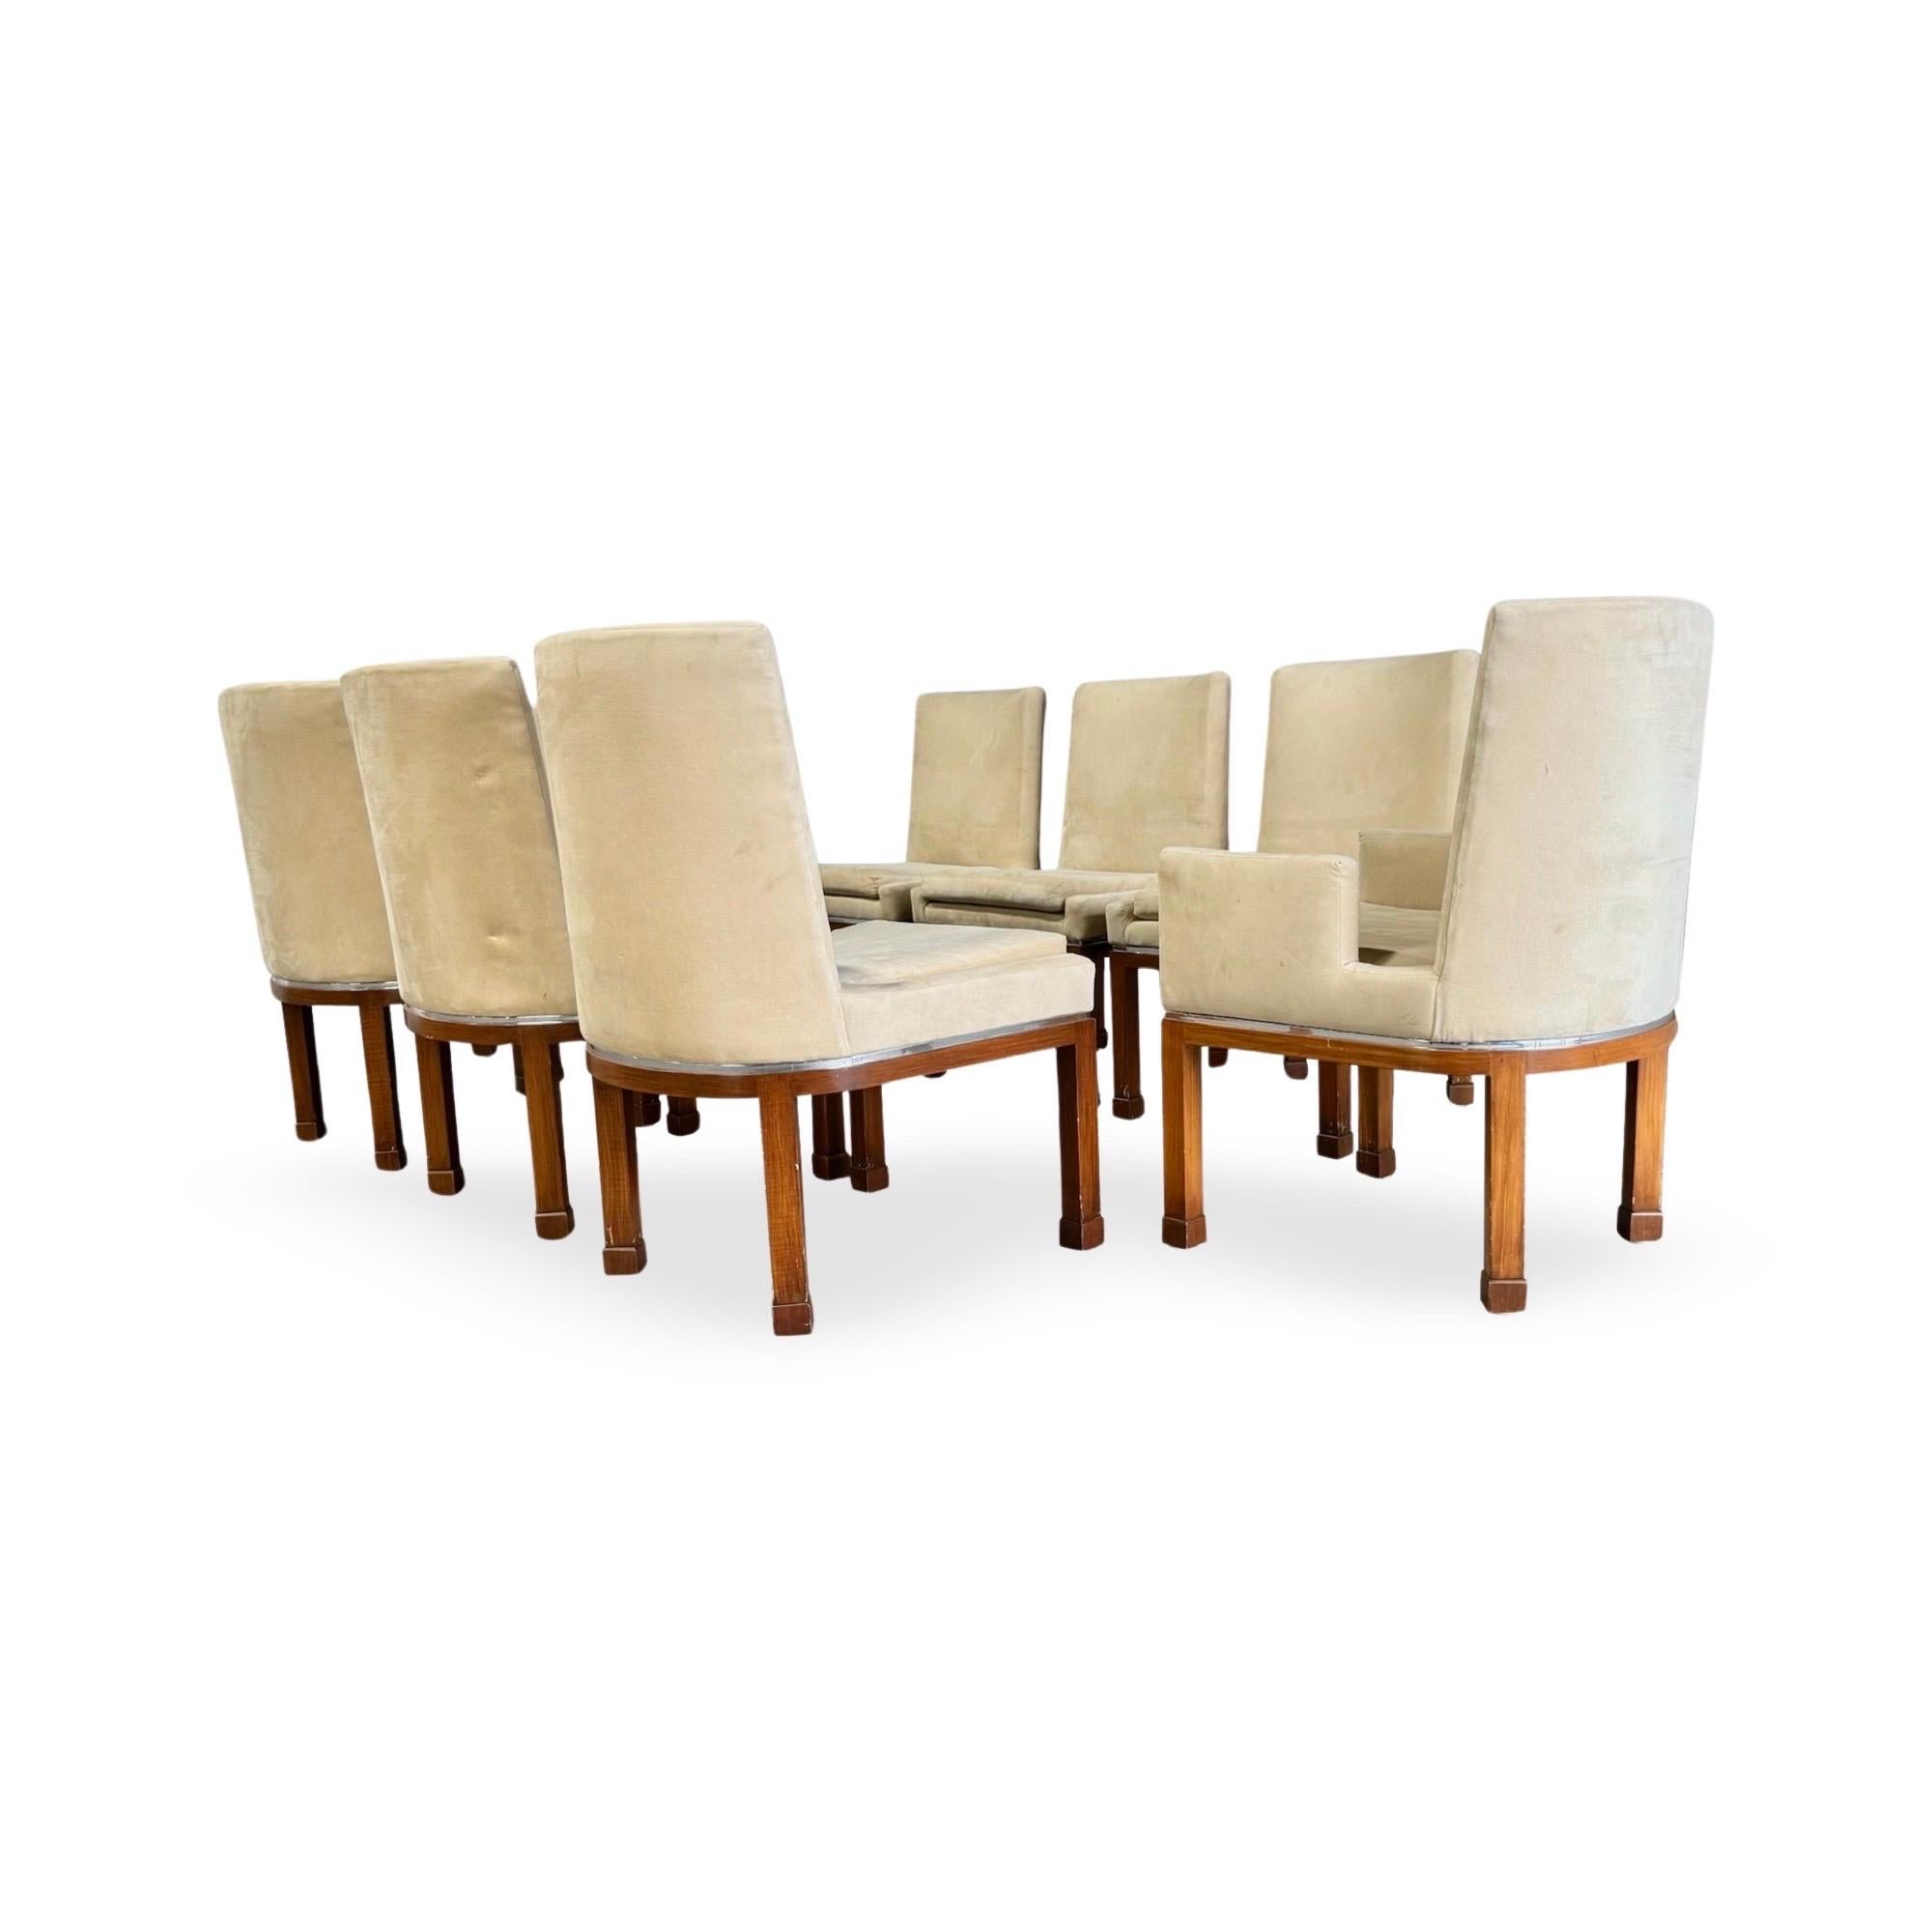 Fabric Vladimir Kagan Vintage Signed Dining Chairs, Set Of Eight c. 1970s For Sale